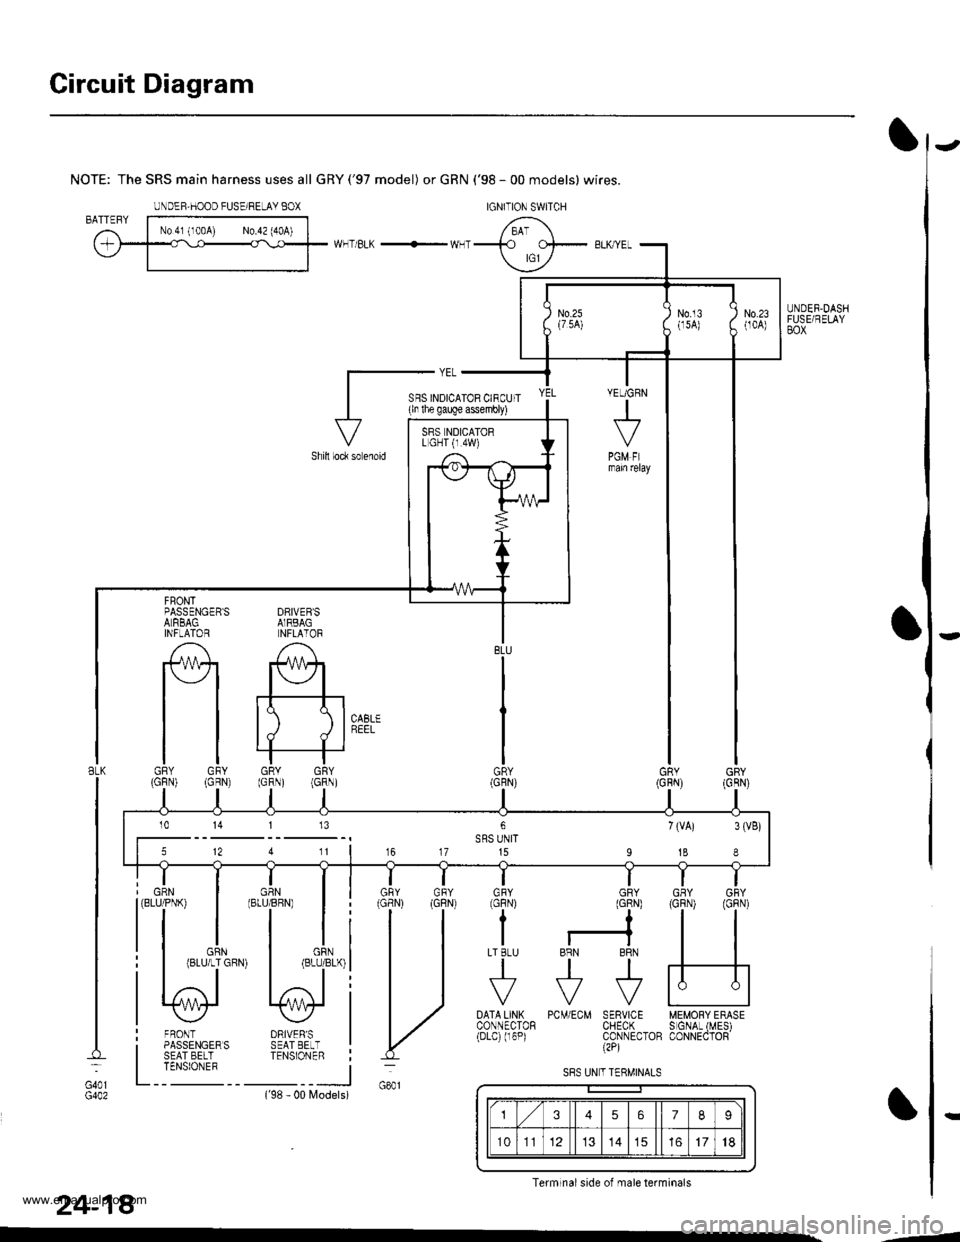 HONDA CR-V 2000 RD1-RD3 / 1.G Owners Manual 
Circuit Diagram
UNDER.DASHFUSE/RELAYBOX
NOTE: The SRS main harness uses all GRY(97 model) or GRN (98 - 00 models) wires.
WHT/BLK -- WHT
DRIVEBSAIRBAGNFLATOR
A
#+
tt tll./ d I
GRY GRY(GRN) (GRN)
F